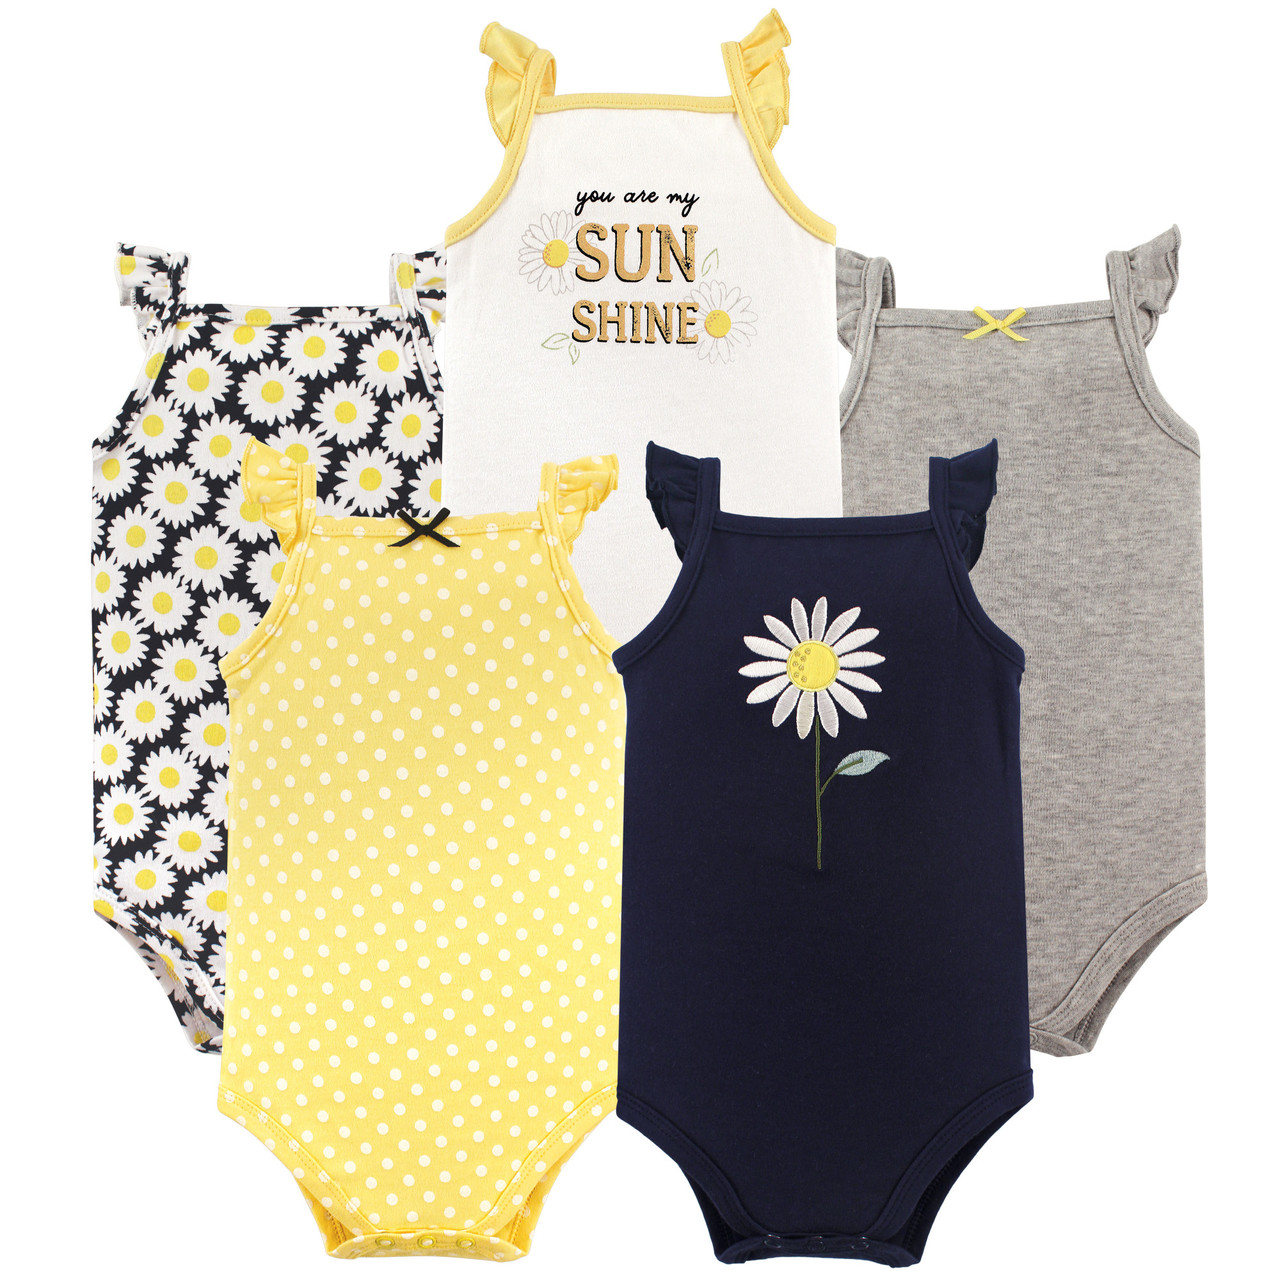 Hudson Baby Cotton Sleeveless Bodysuits Clothes 3-6 Months Beautiful Sea 5 Pack 